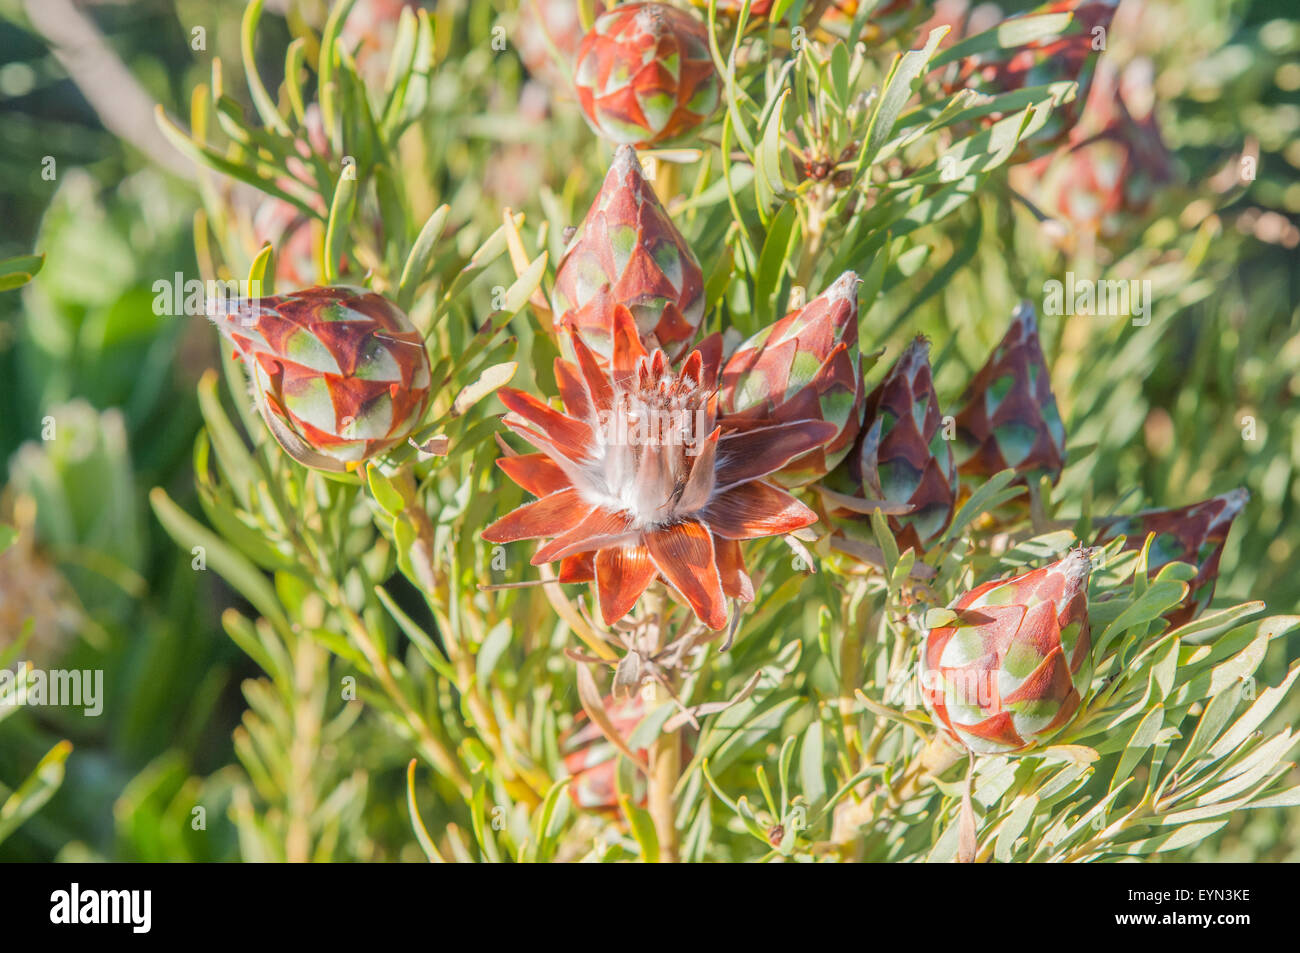 Flower and cones of a protea plant Stock Photo